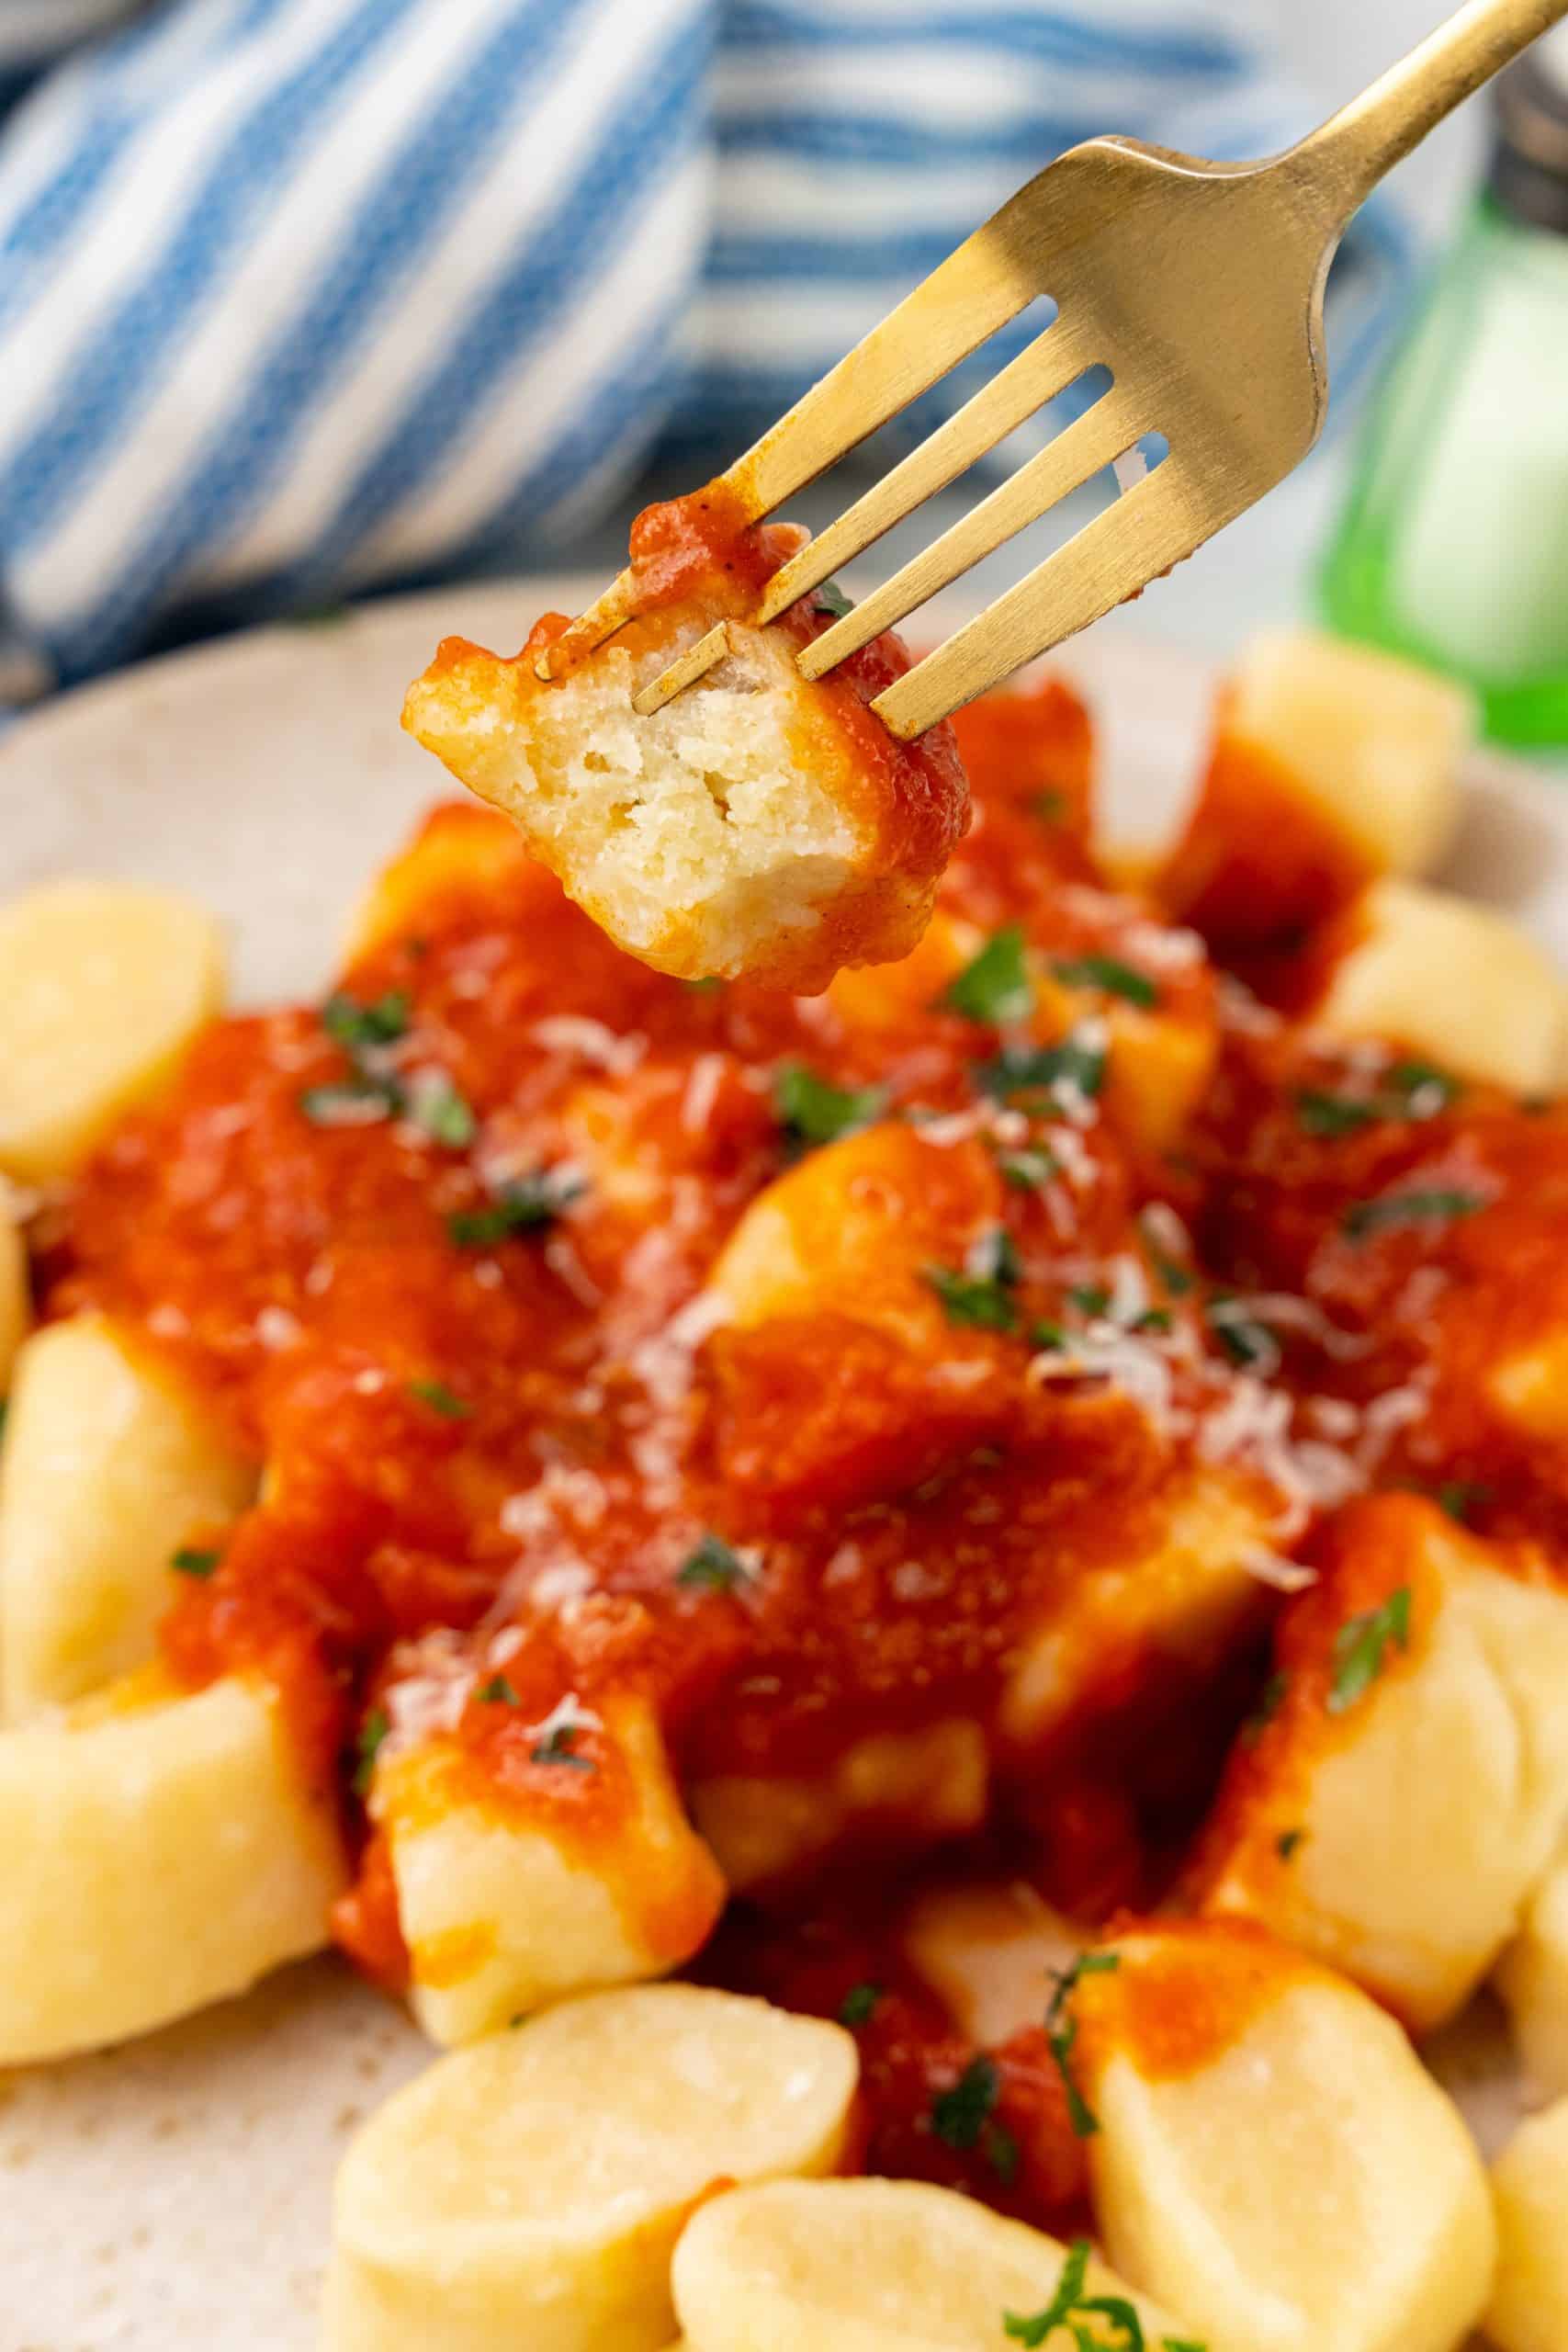 a gold fork holding up a sauce covered bitten piece of cooked gnocchi